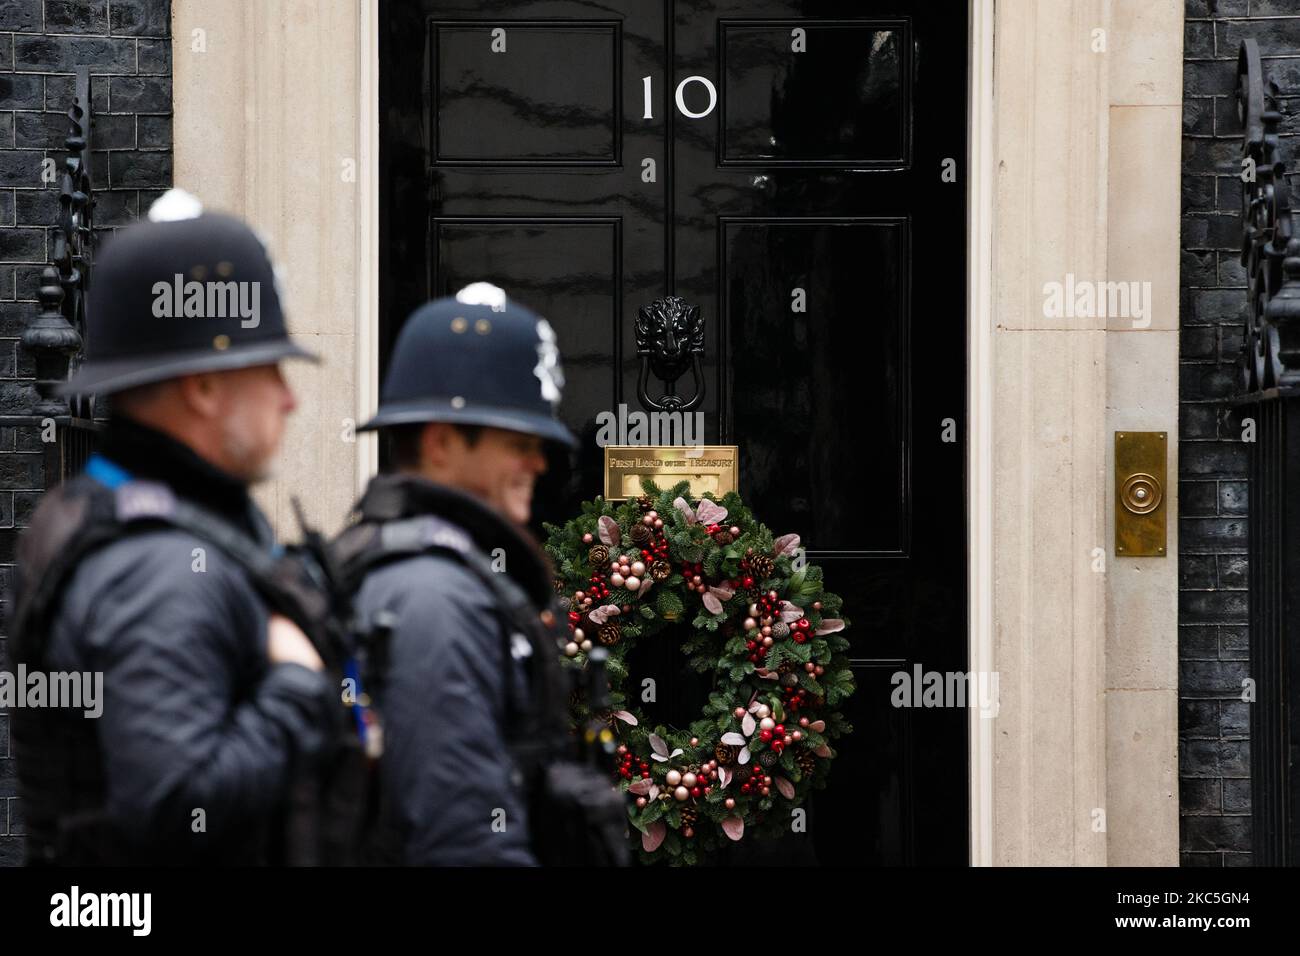 Police officers walk past the door of 10 Downing Street, adorned with a Christmas wreath for the festive season, in London, England, on December 9, 2020. (Photo by David Cliff/NurPhoto) Stock Photo